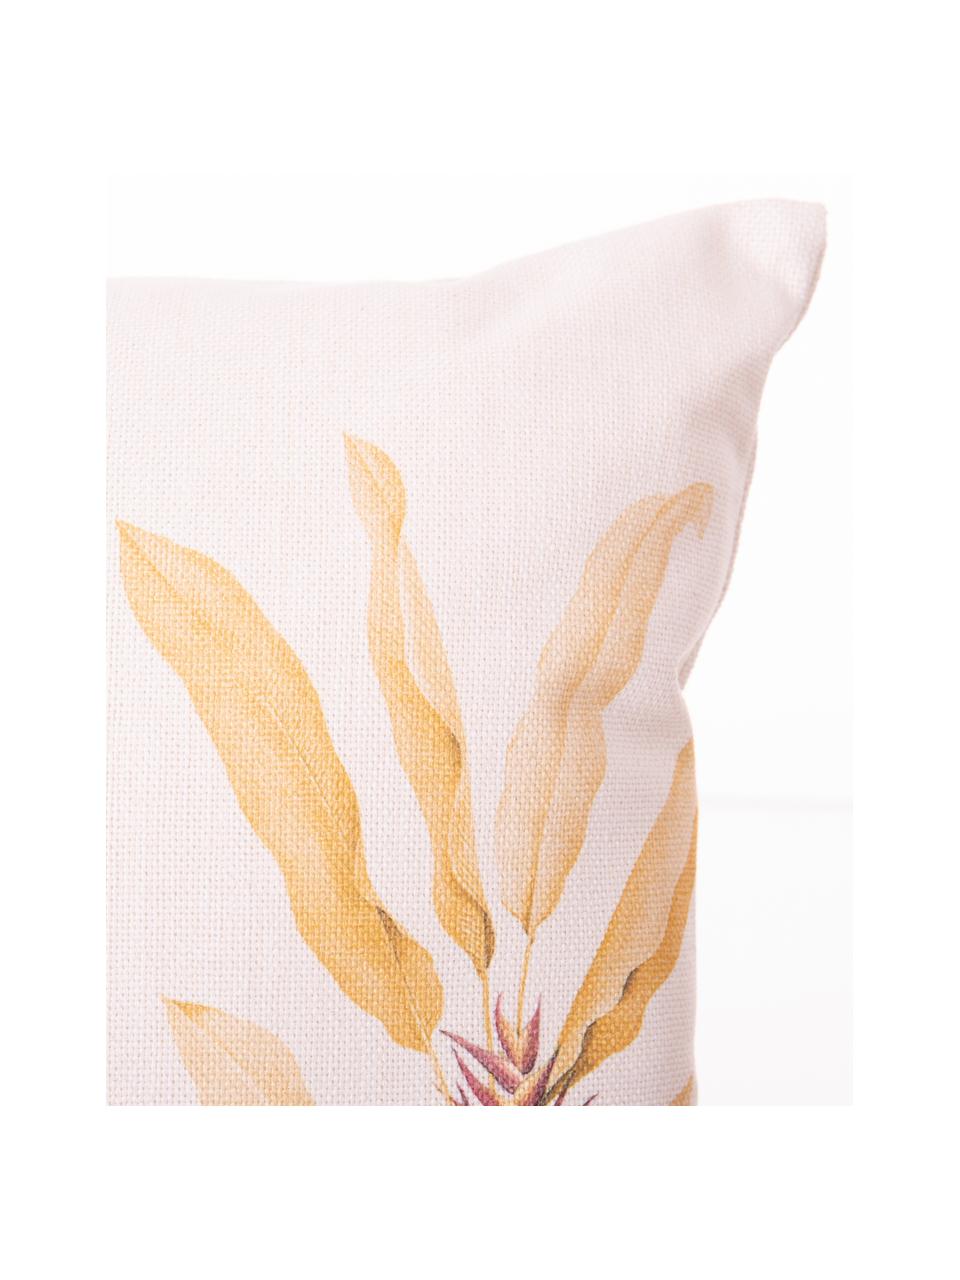 Coussin 45x45 Leaves, Multicolore